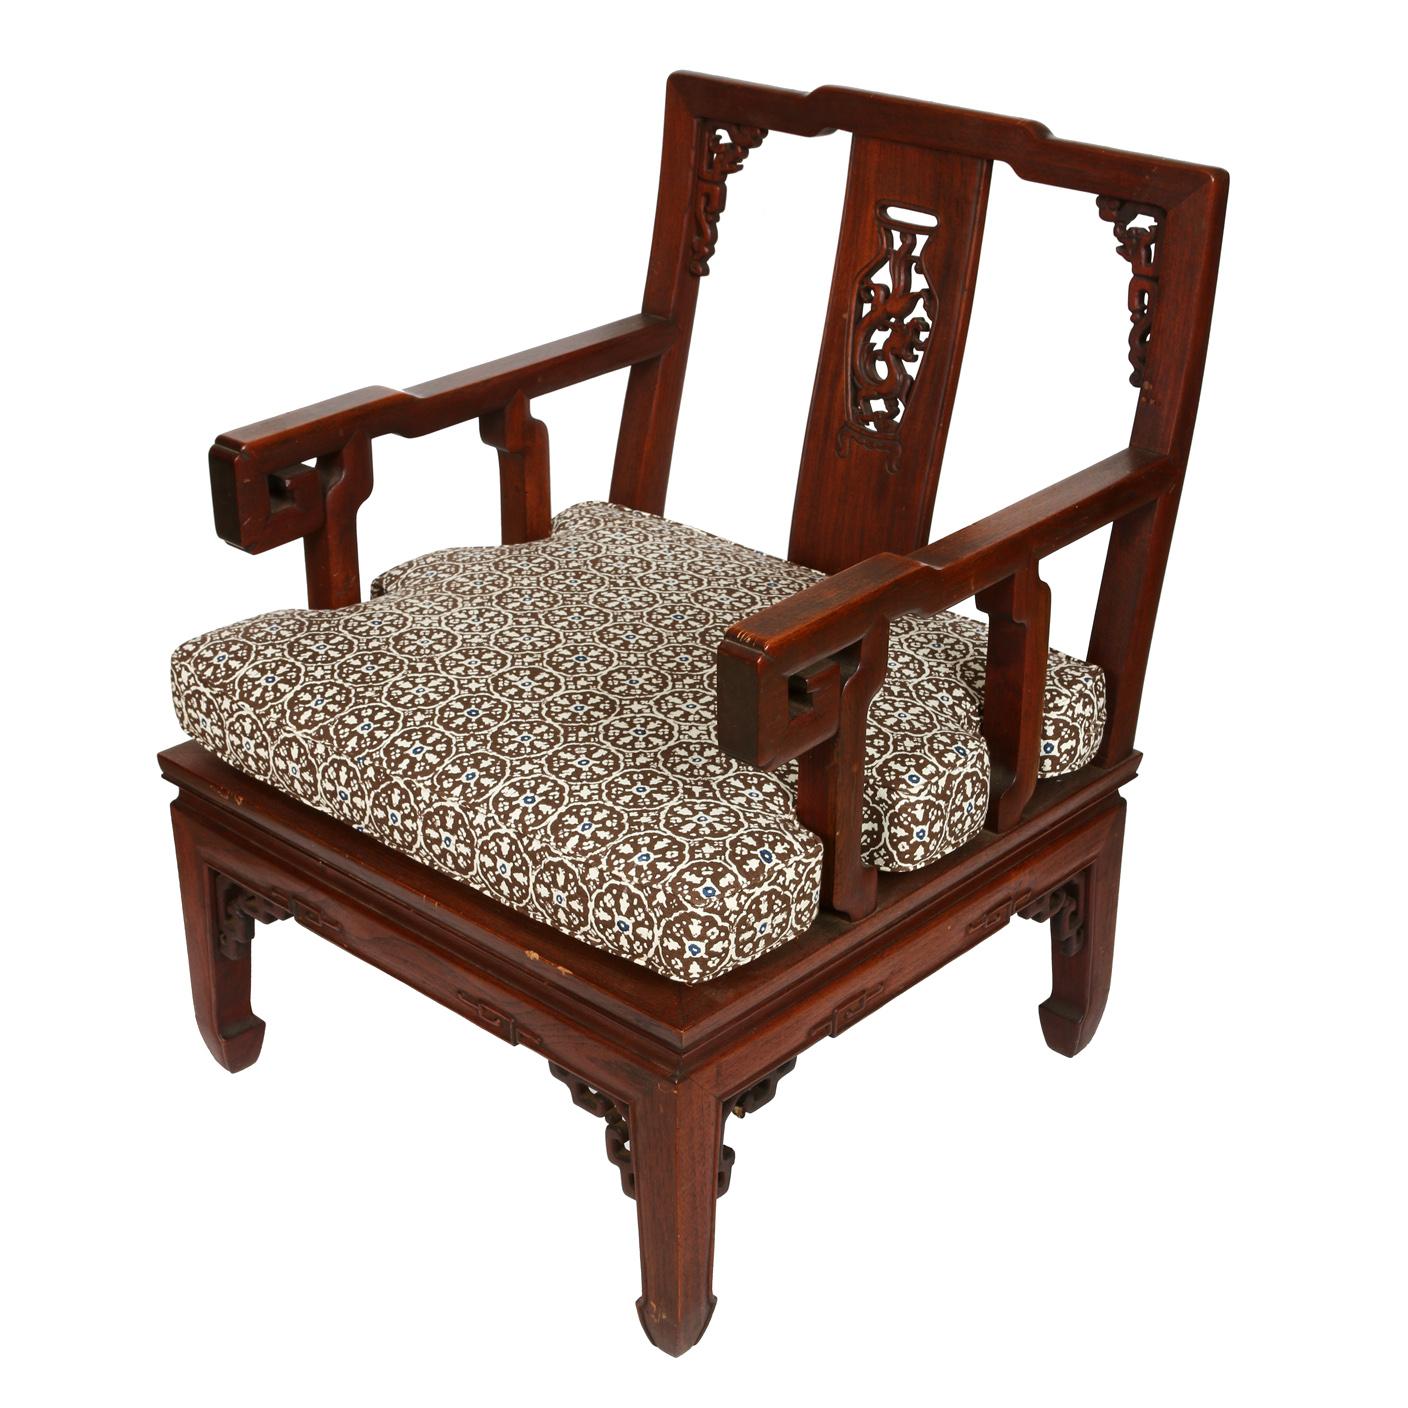 Pair of Asian Carved Hardwood Chairs In Good Condition For Sale In Locust Valley, NY